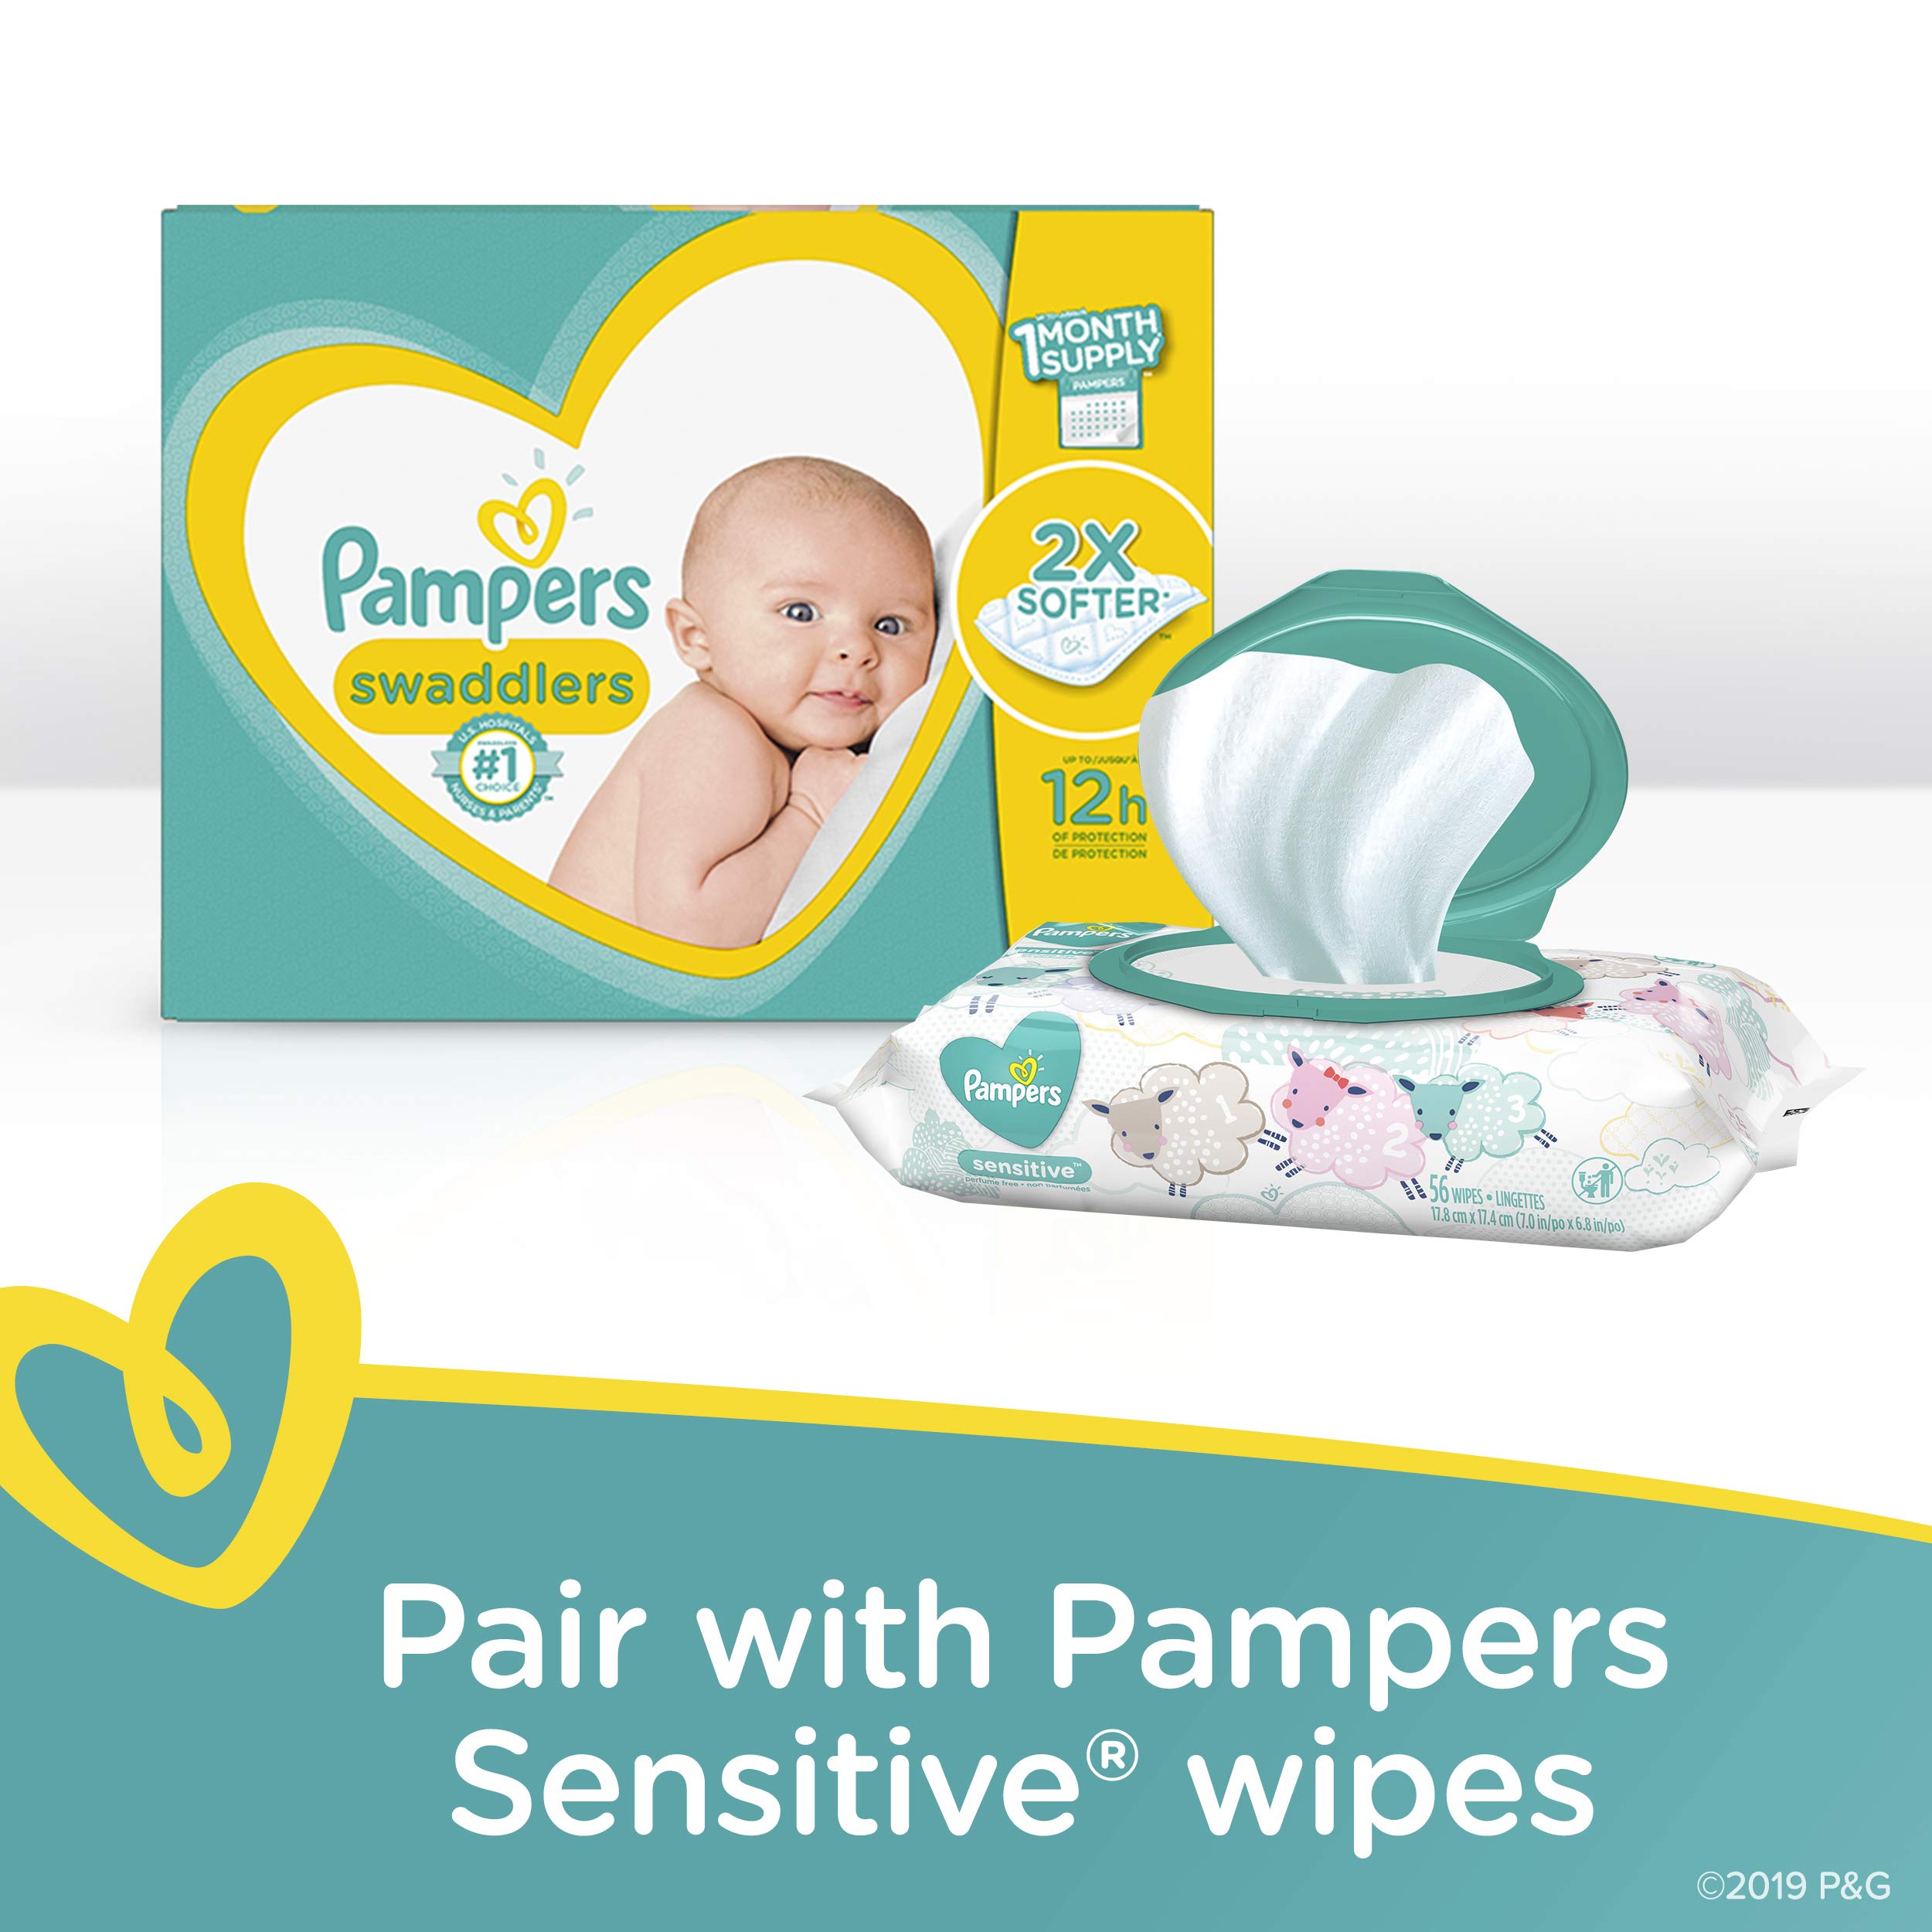 Diapers Size 6, 108 Count - Pampers Swaddlers Disposable Baby Diapers (Packaging & Prints May Vary)